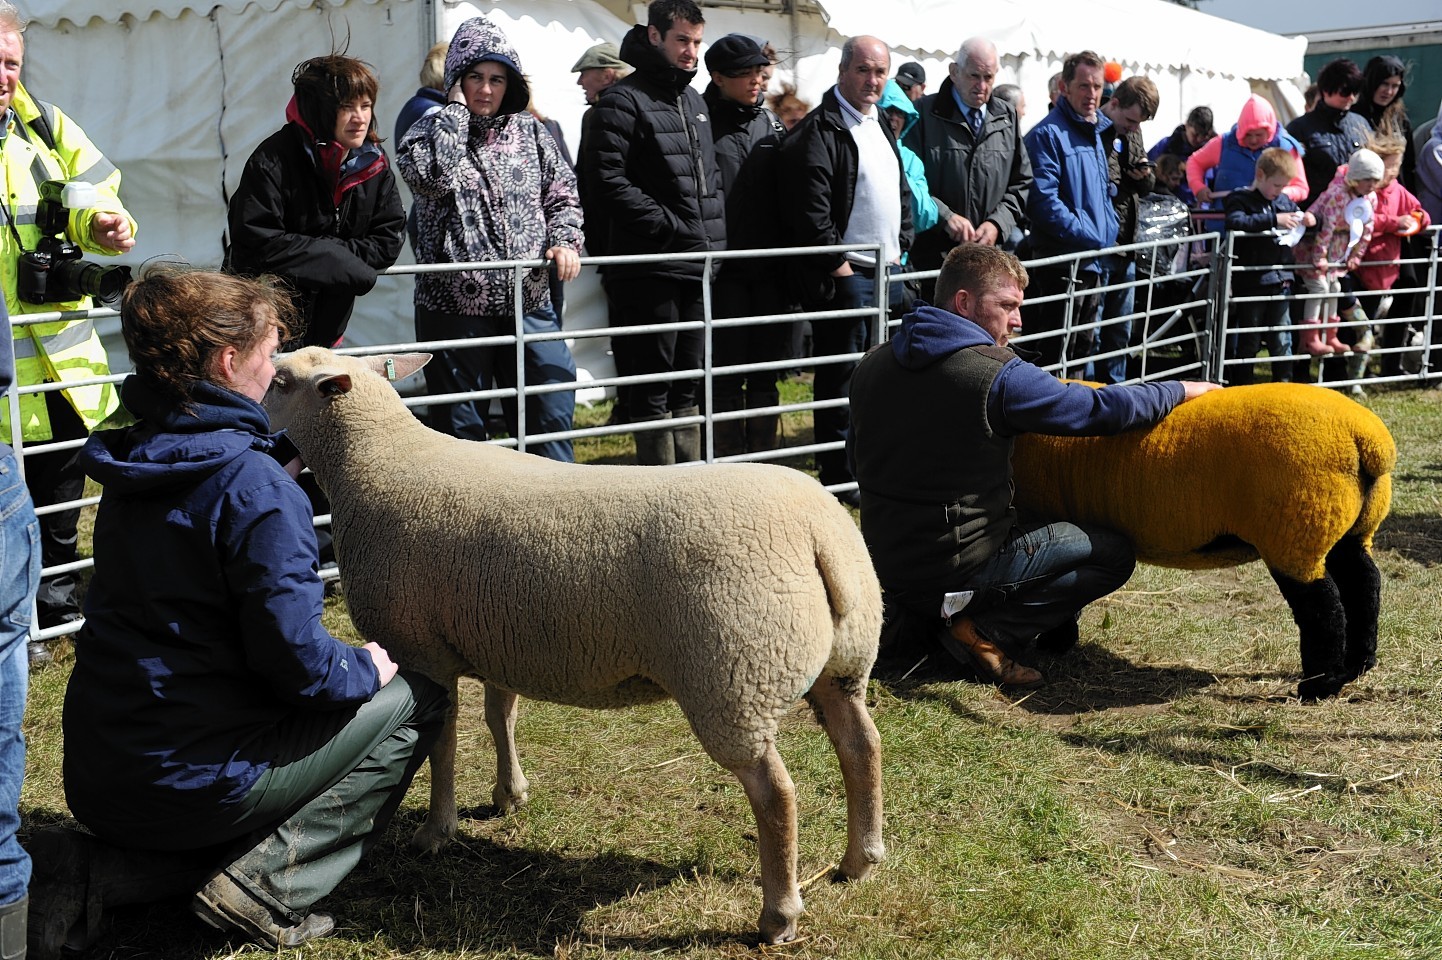 Keith Show 2016 - Sheep judging.Picture by Gordon Lennox 08/08/2016